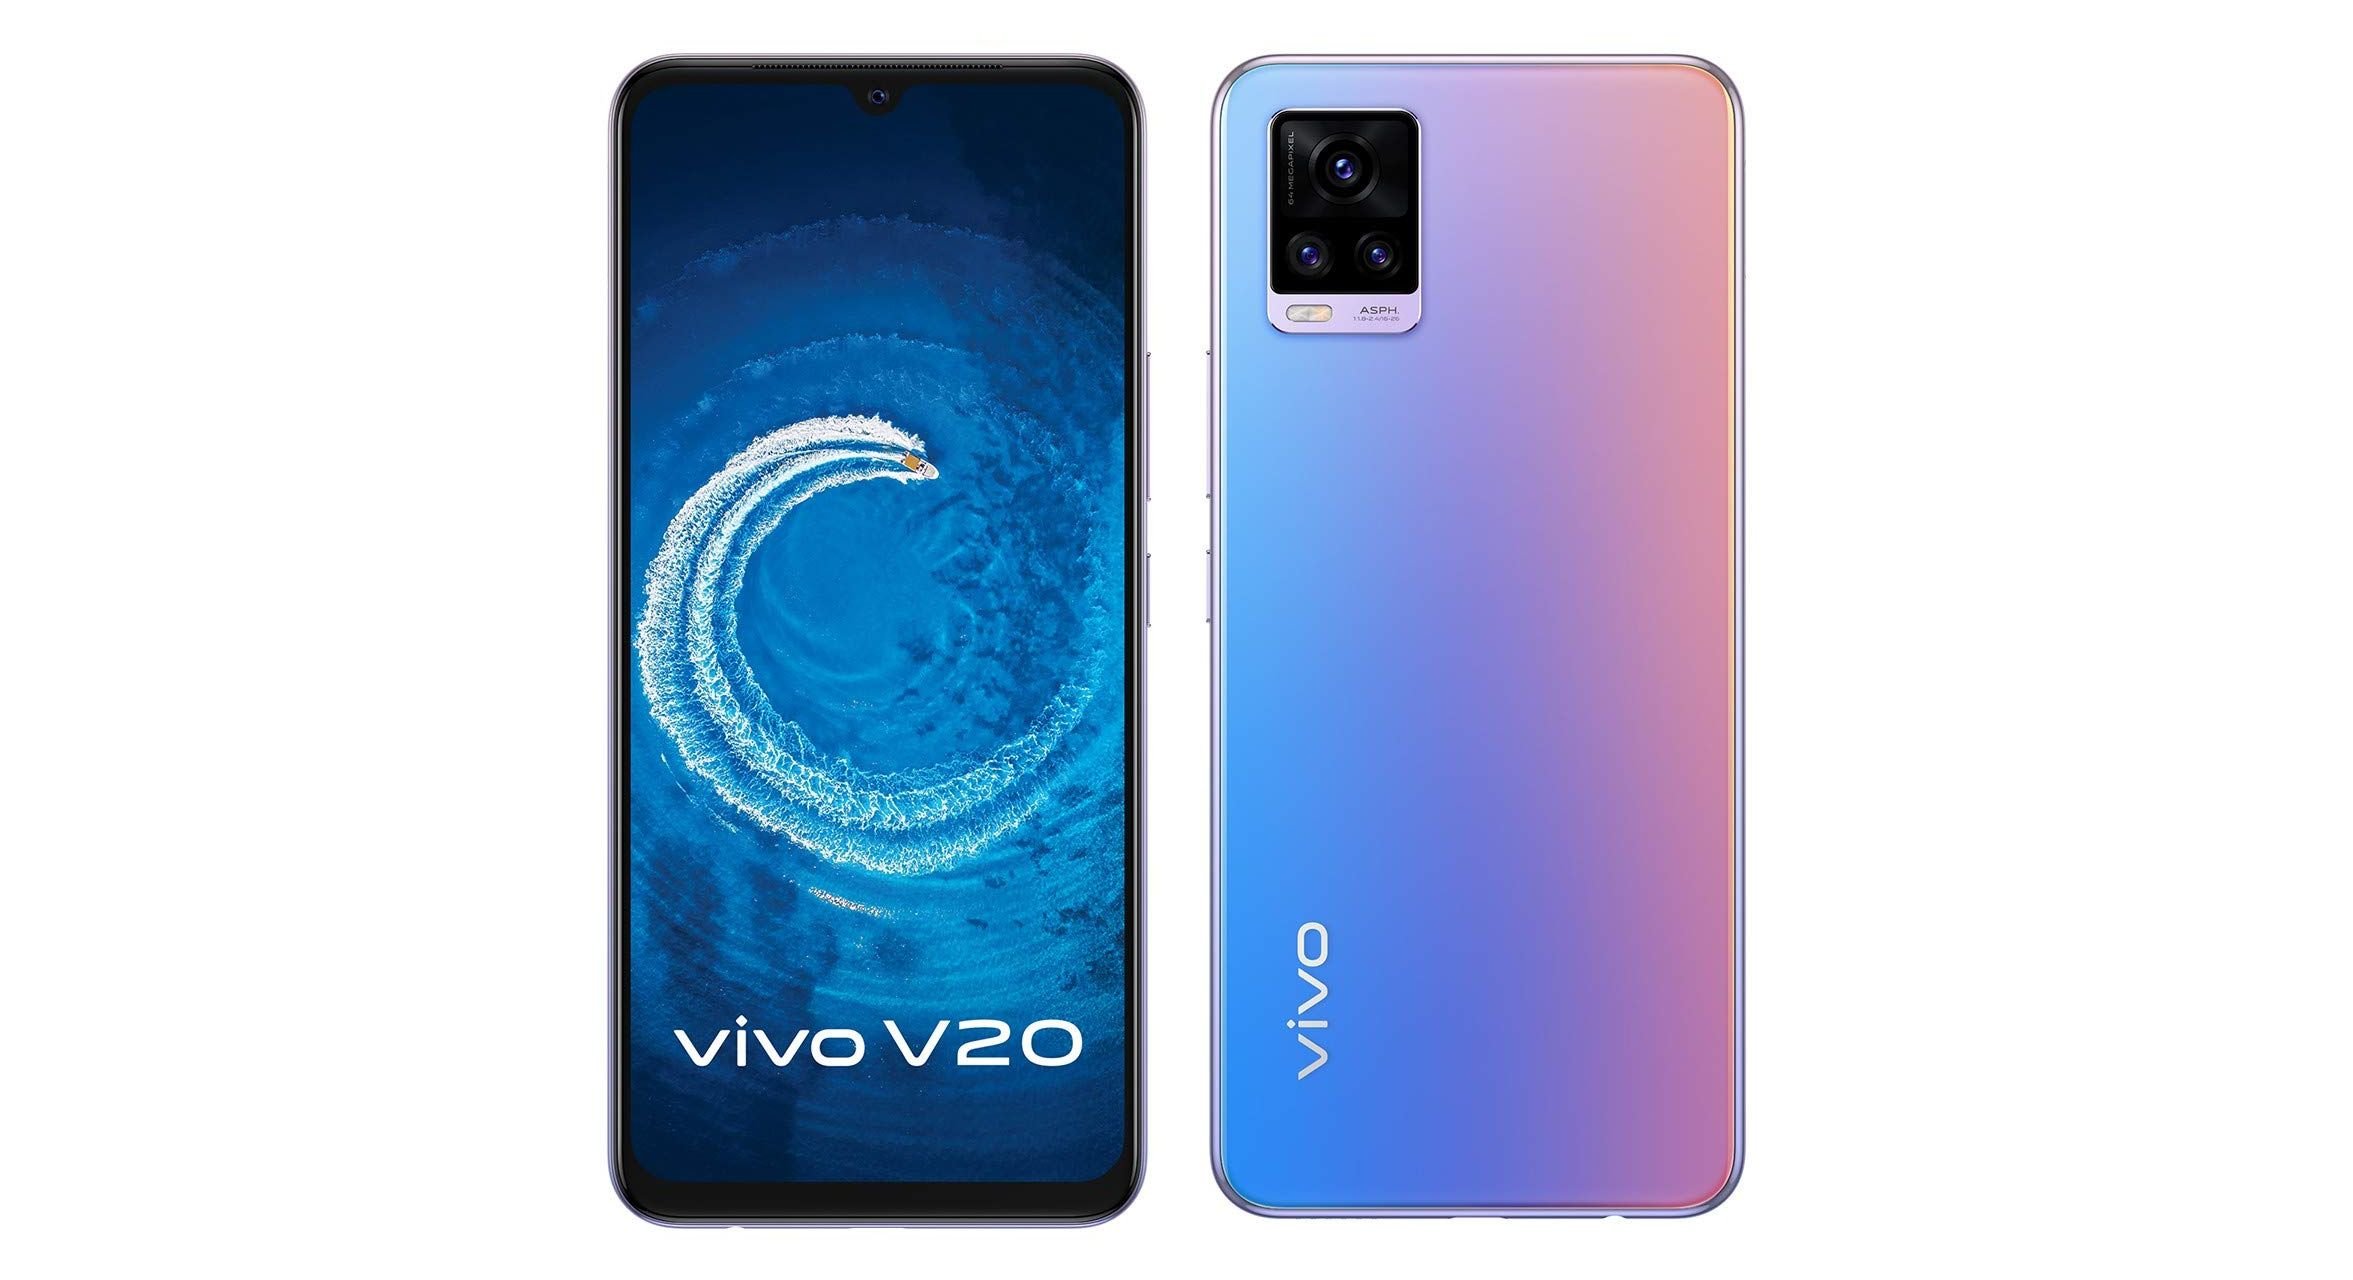 Vivo Silently Unveils the 2021 Edition of the Vivo V20 Smartphone in India; Retails for Rs 24,990 (~$339)